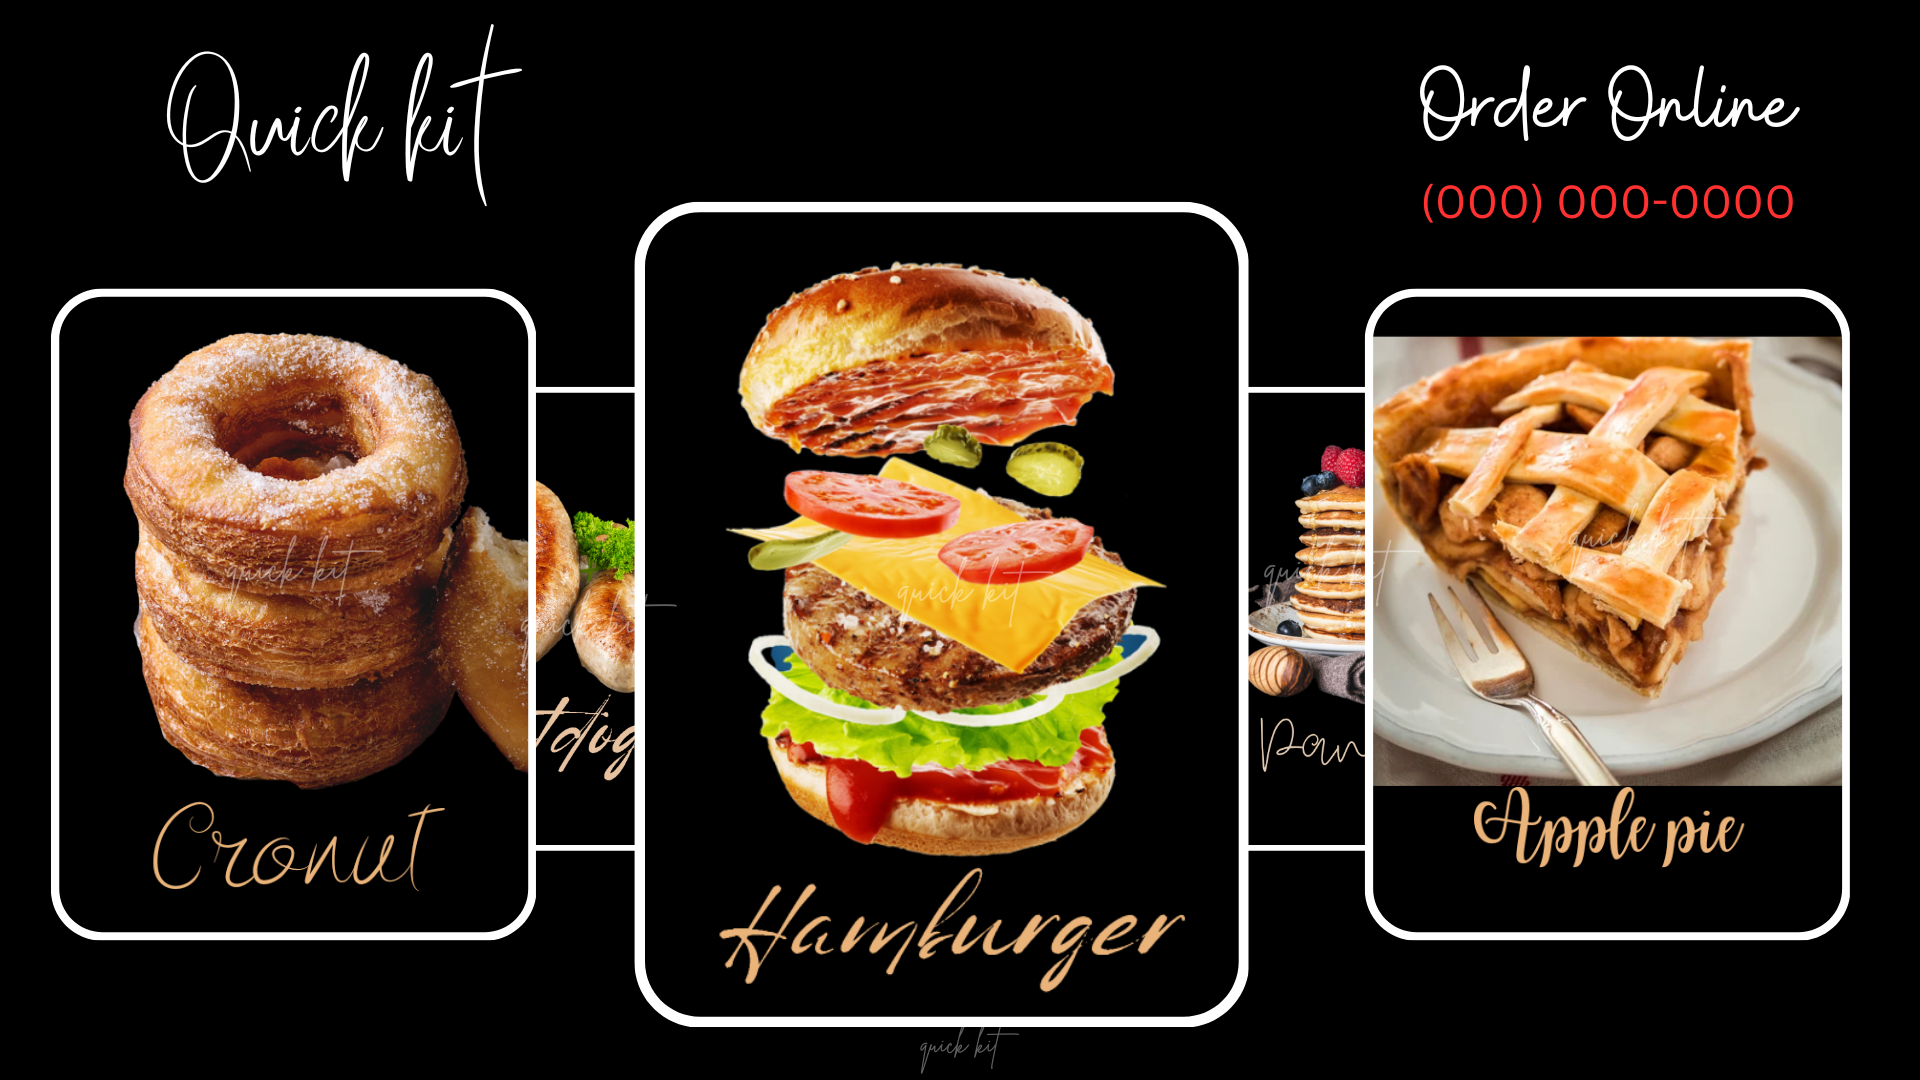 Carousel Restaurant Food Advertisement: Crafting a Custom Video for Effective Business Marketing